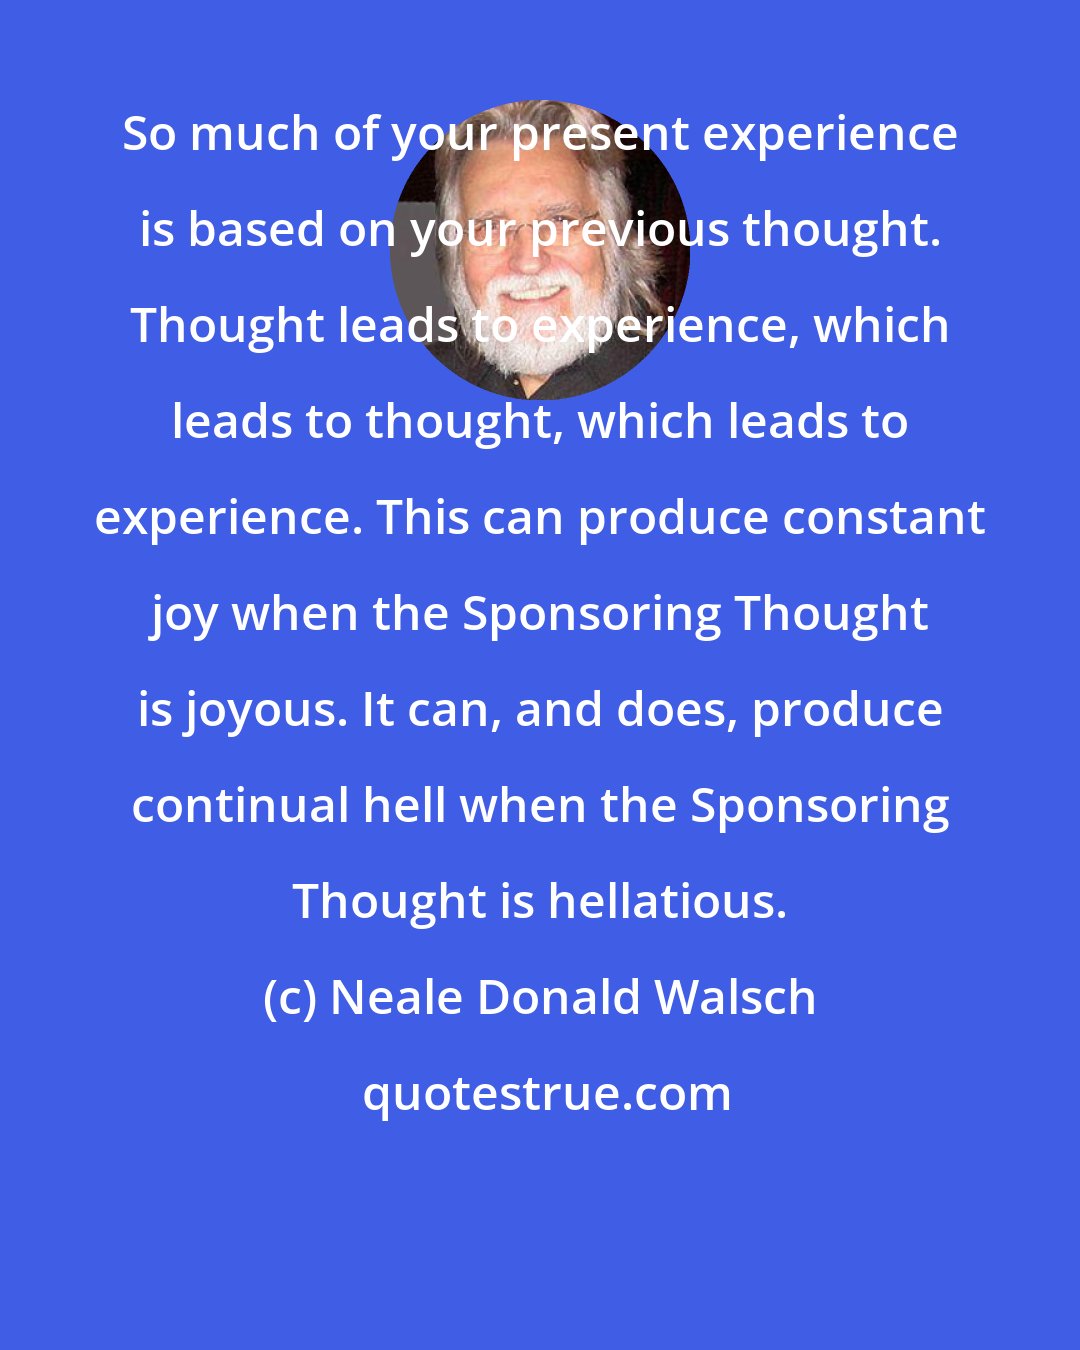 Neale Donald Walsch: So much of your present experience is based on your previous thought. Thought leads to experience, which leads to thought, which leads to experience. This can produce constant joy when the Sponsoring Thought is joyous. It can, and does, produce continual hell when the Sponsoring Thought is hellatious.